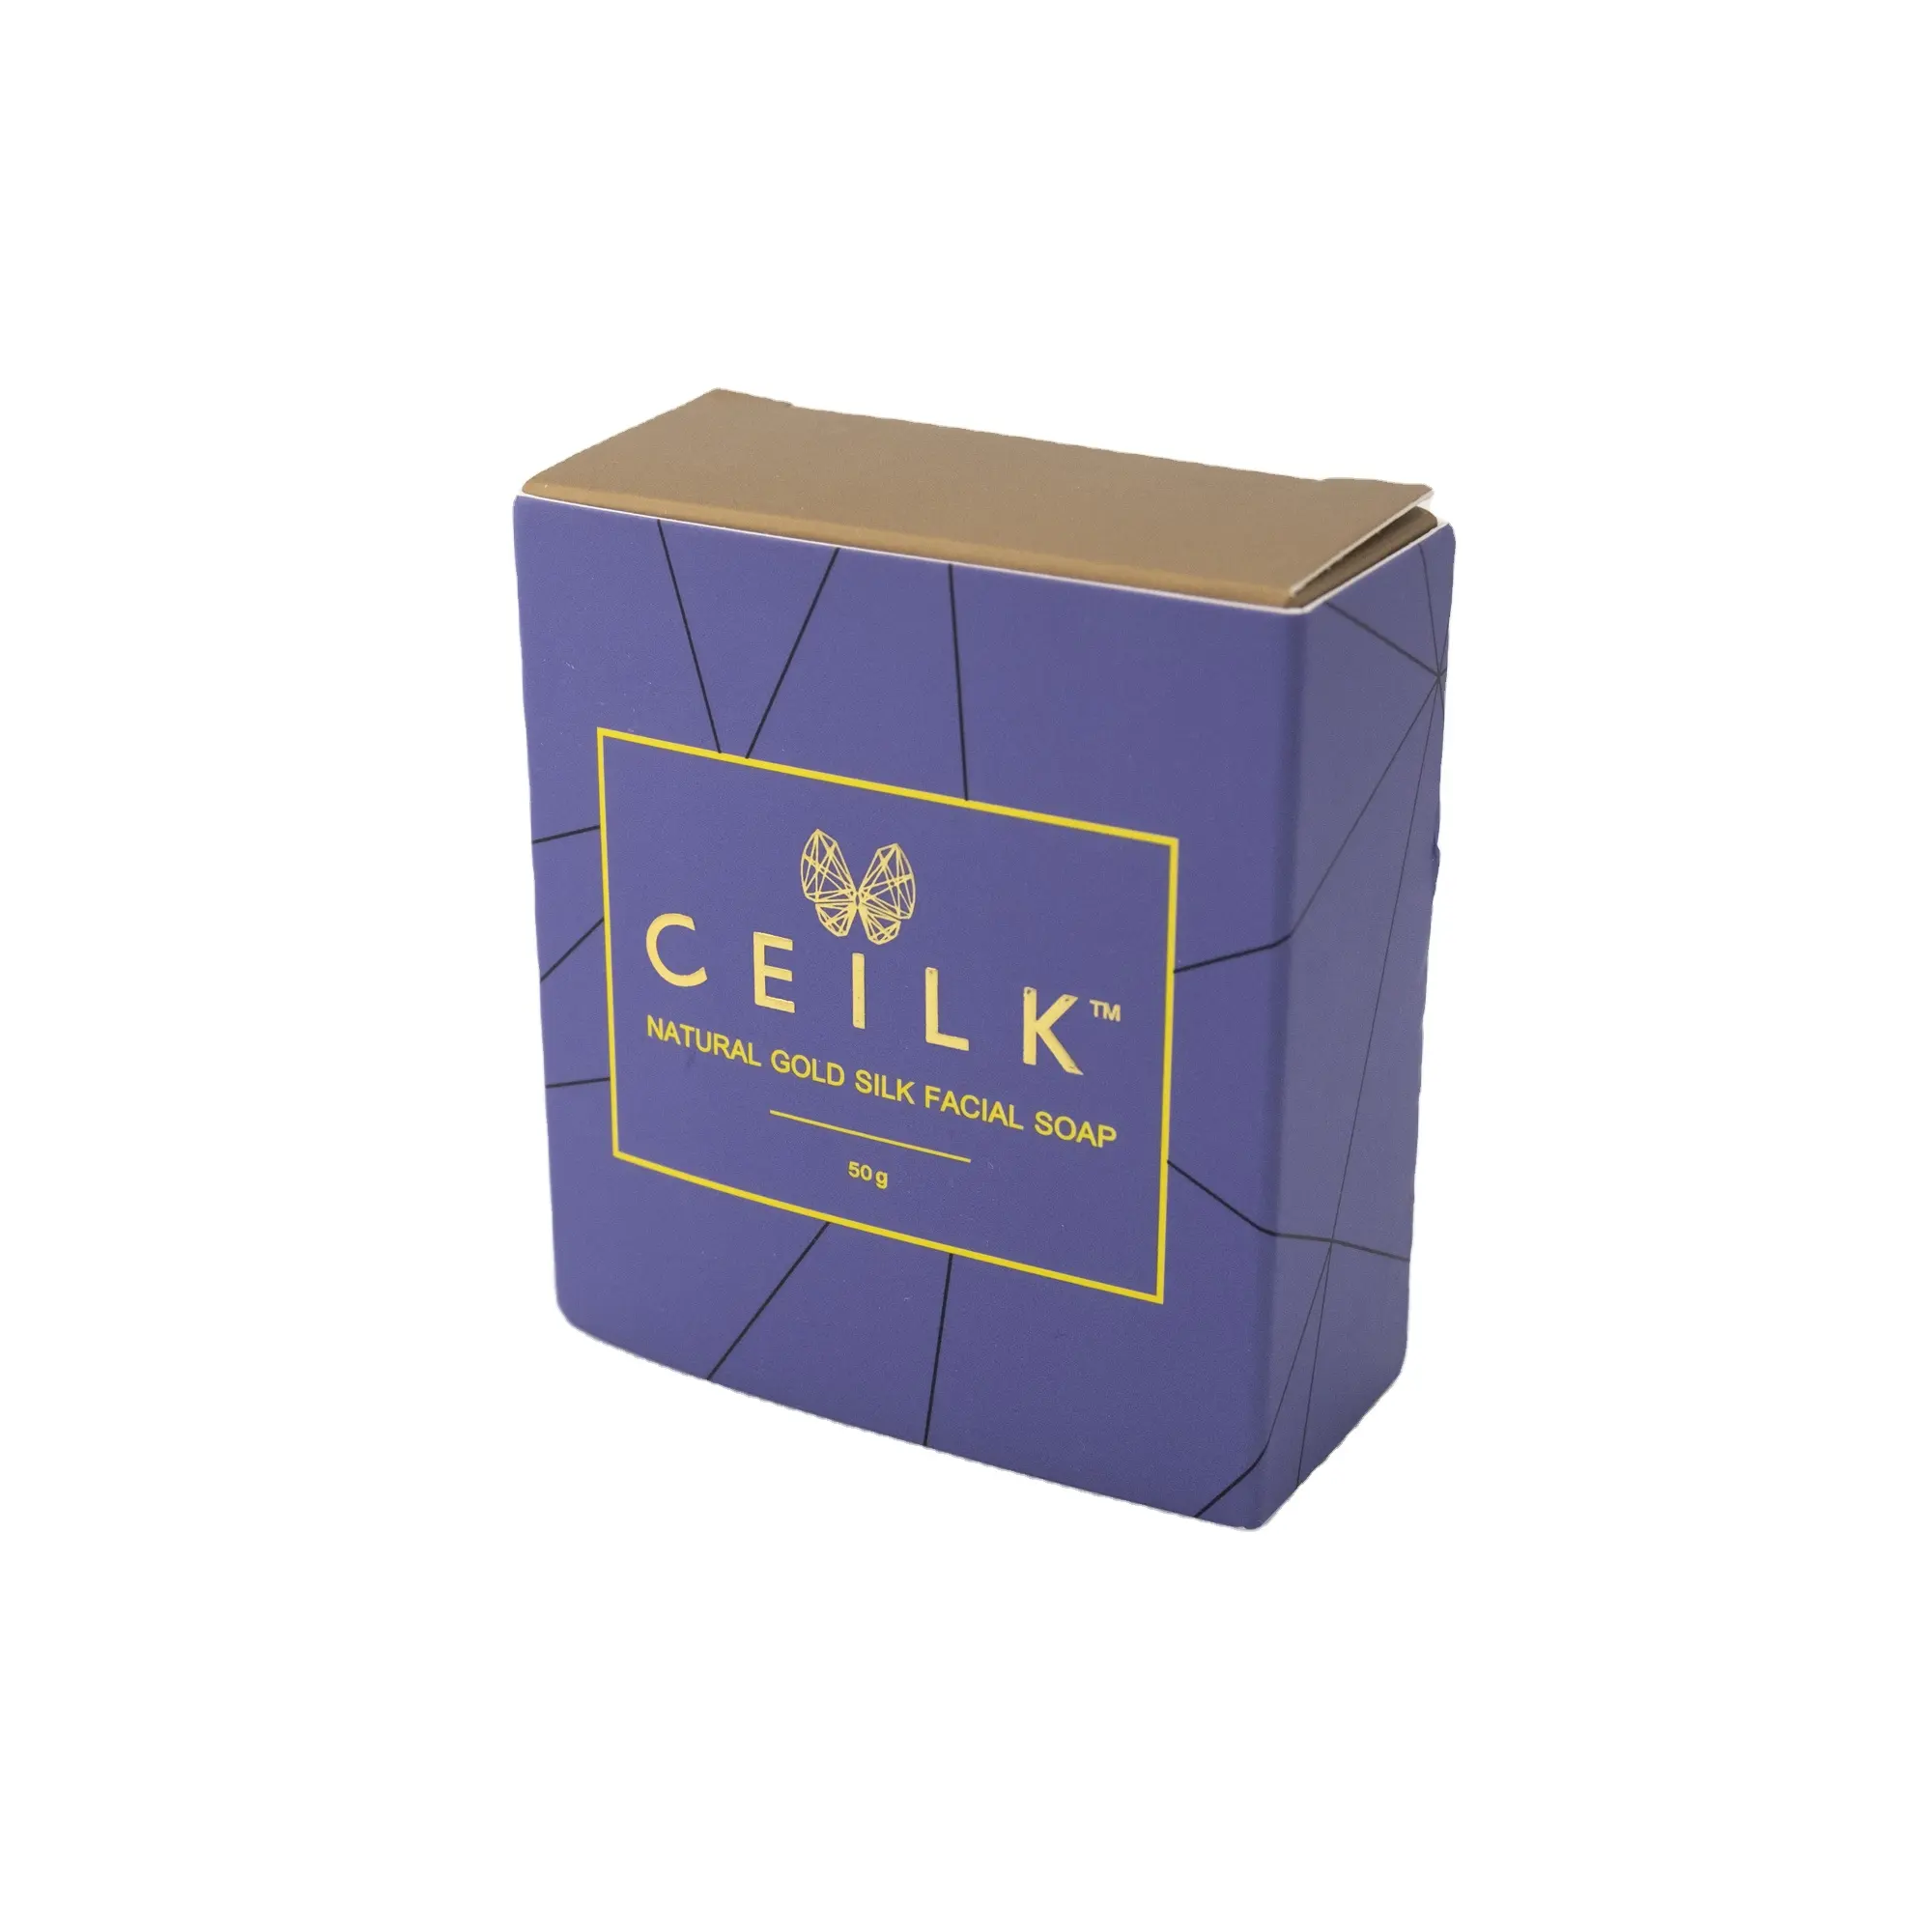 Best Seller CEILK Natural Gold Silk Facial Soap 50g High Quality Premium Product From Chiang Rai Thailand